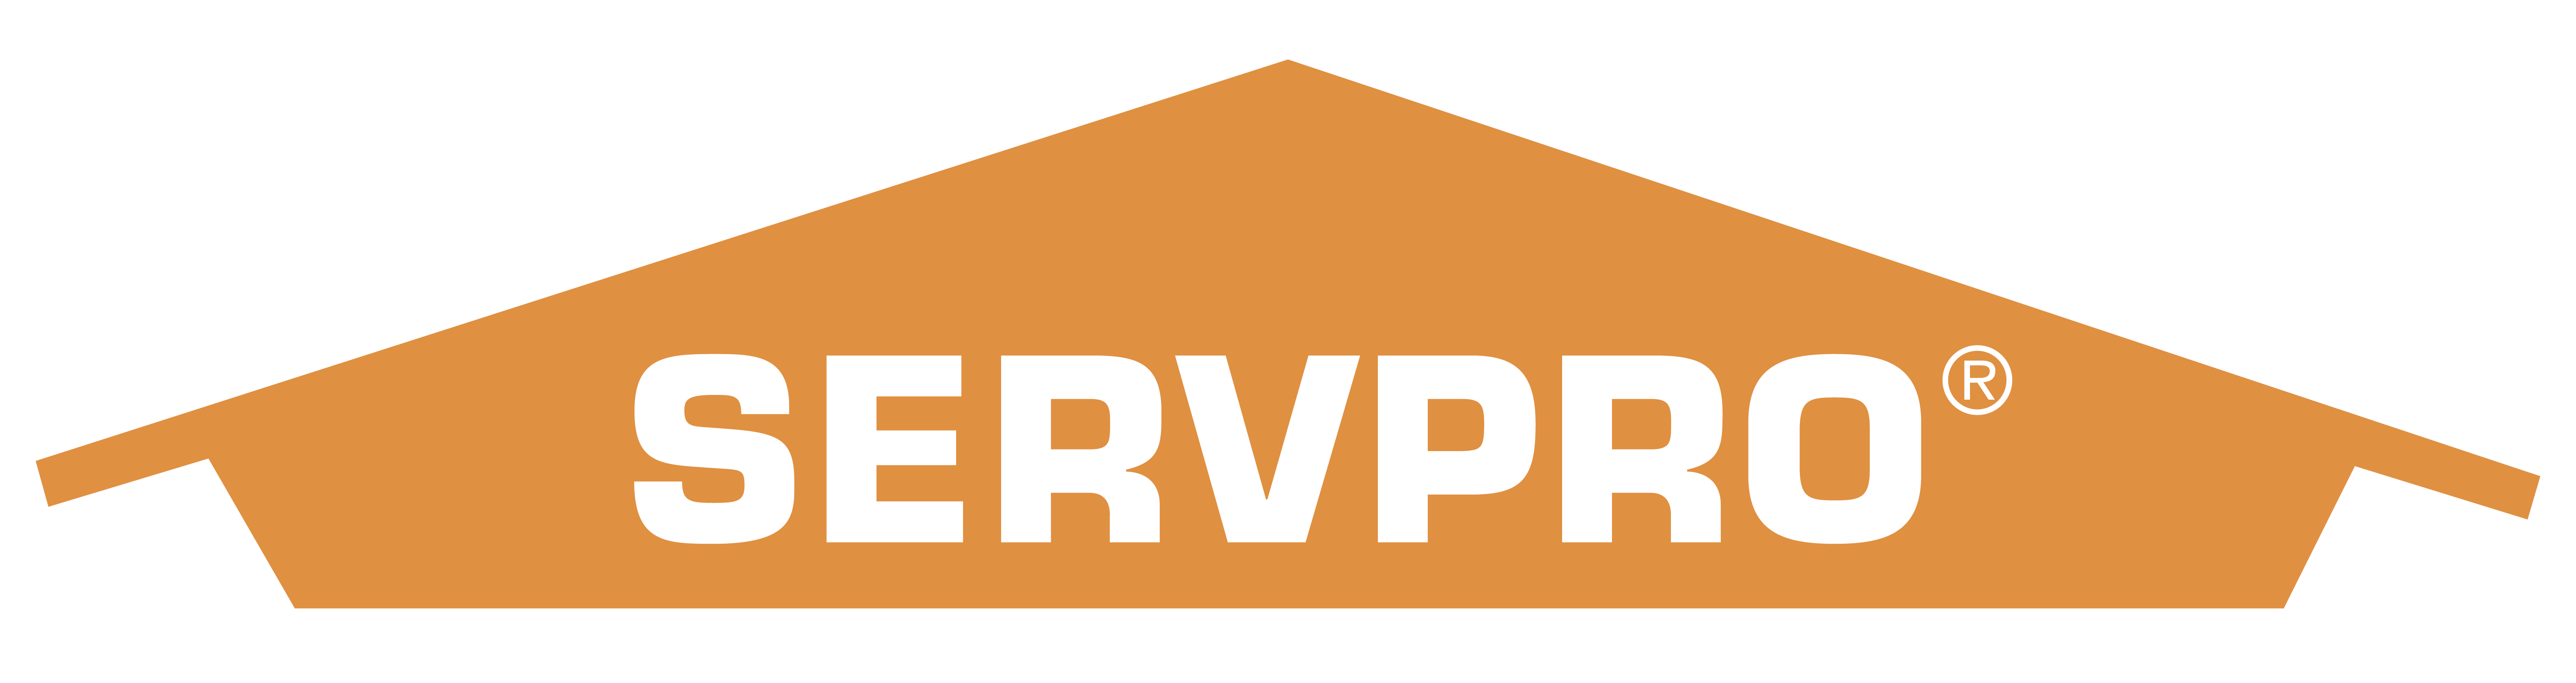 SERVPRO logo with white text inside an orange house silhouette